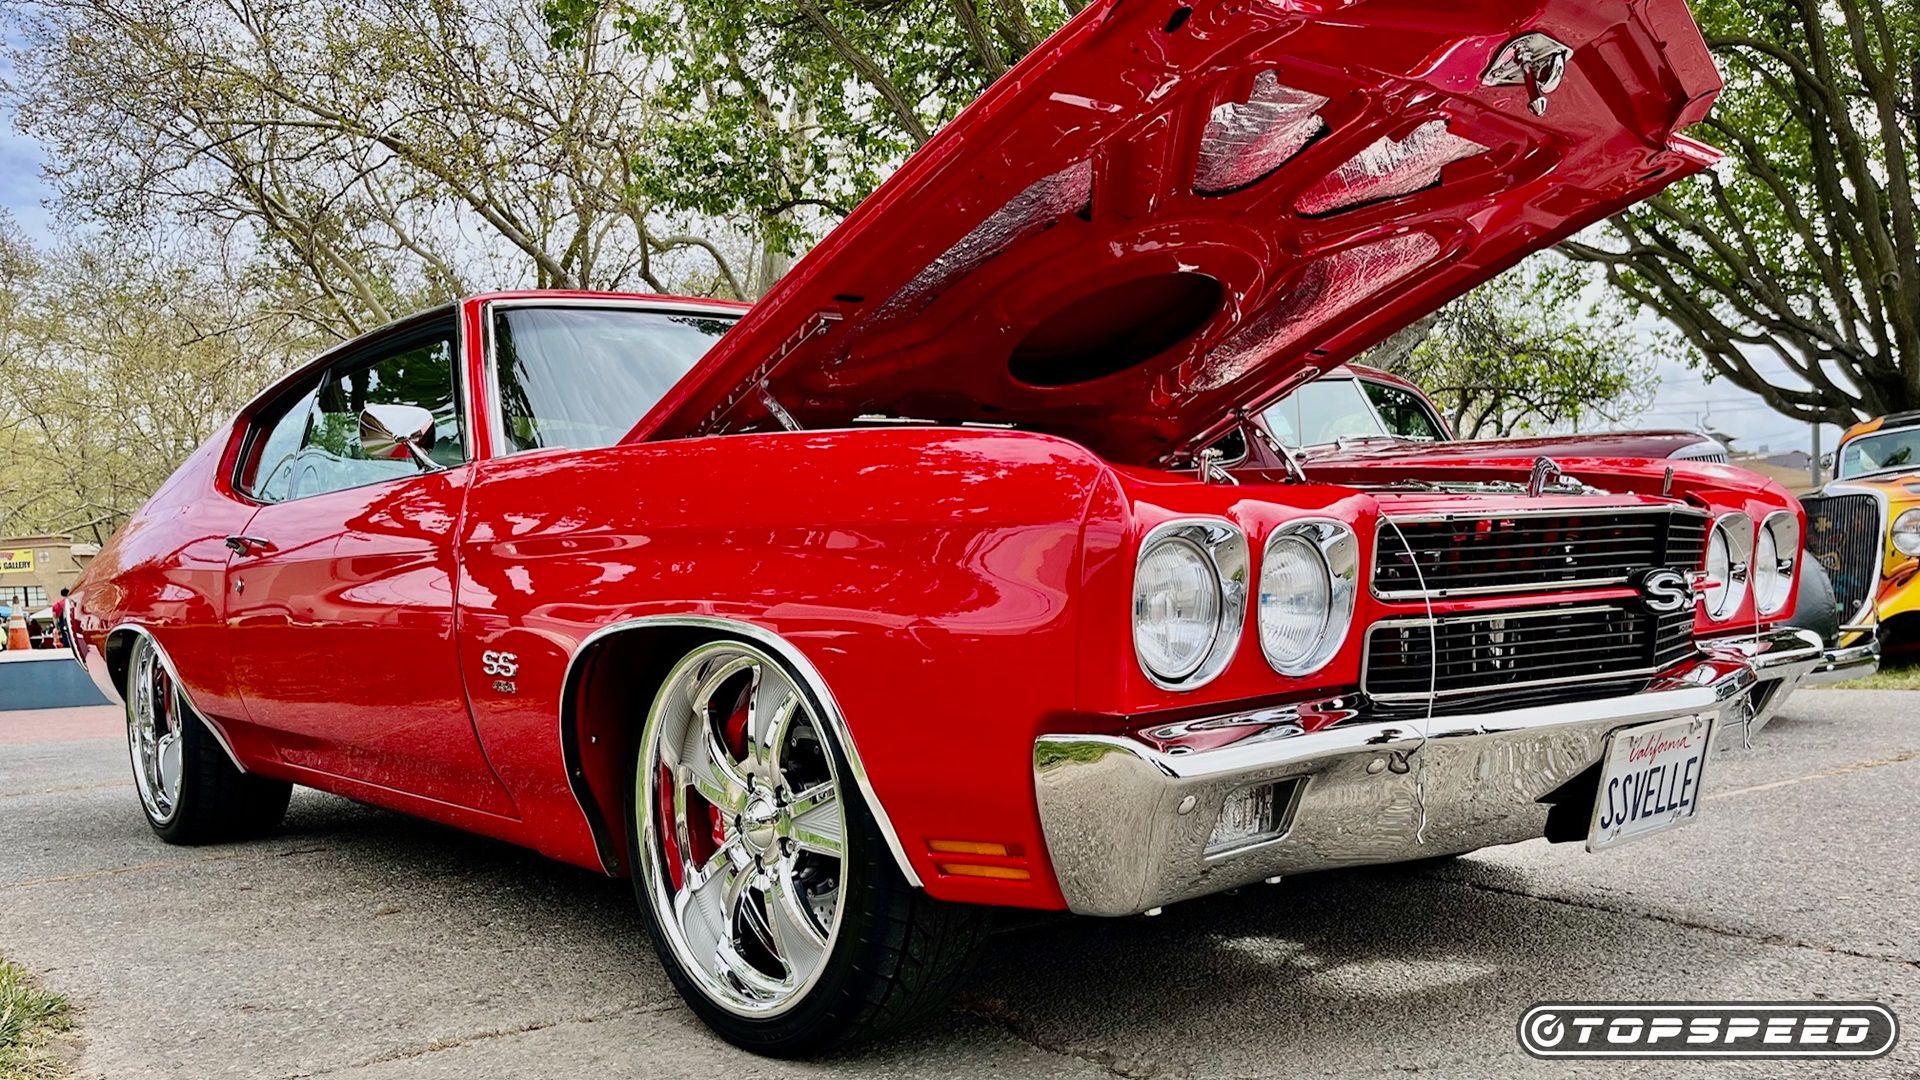 Second Generation Chevy Chevelle SS in Red and White